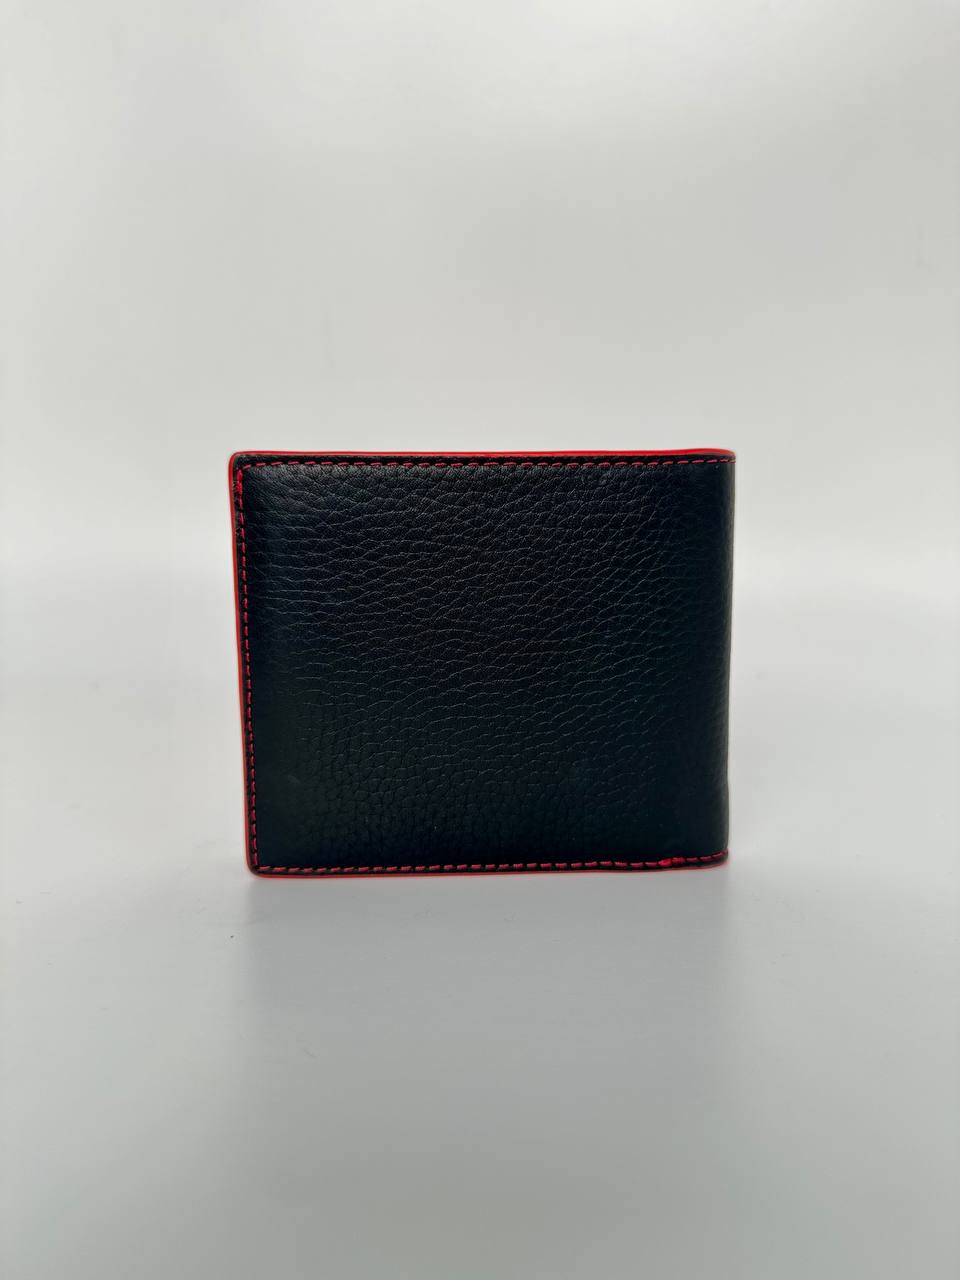 MK Men Cooper Graphic Pebbled Leather Billfold Wallet in Flame (36H1LCOF1X)